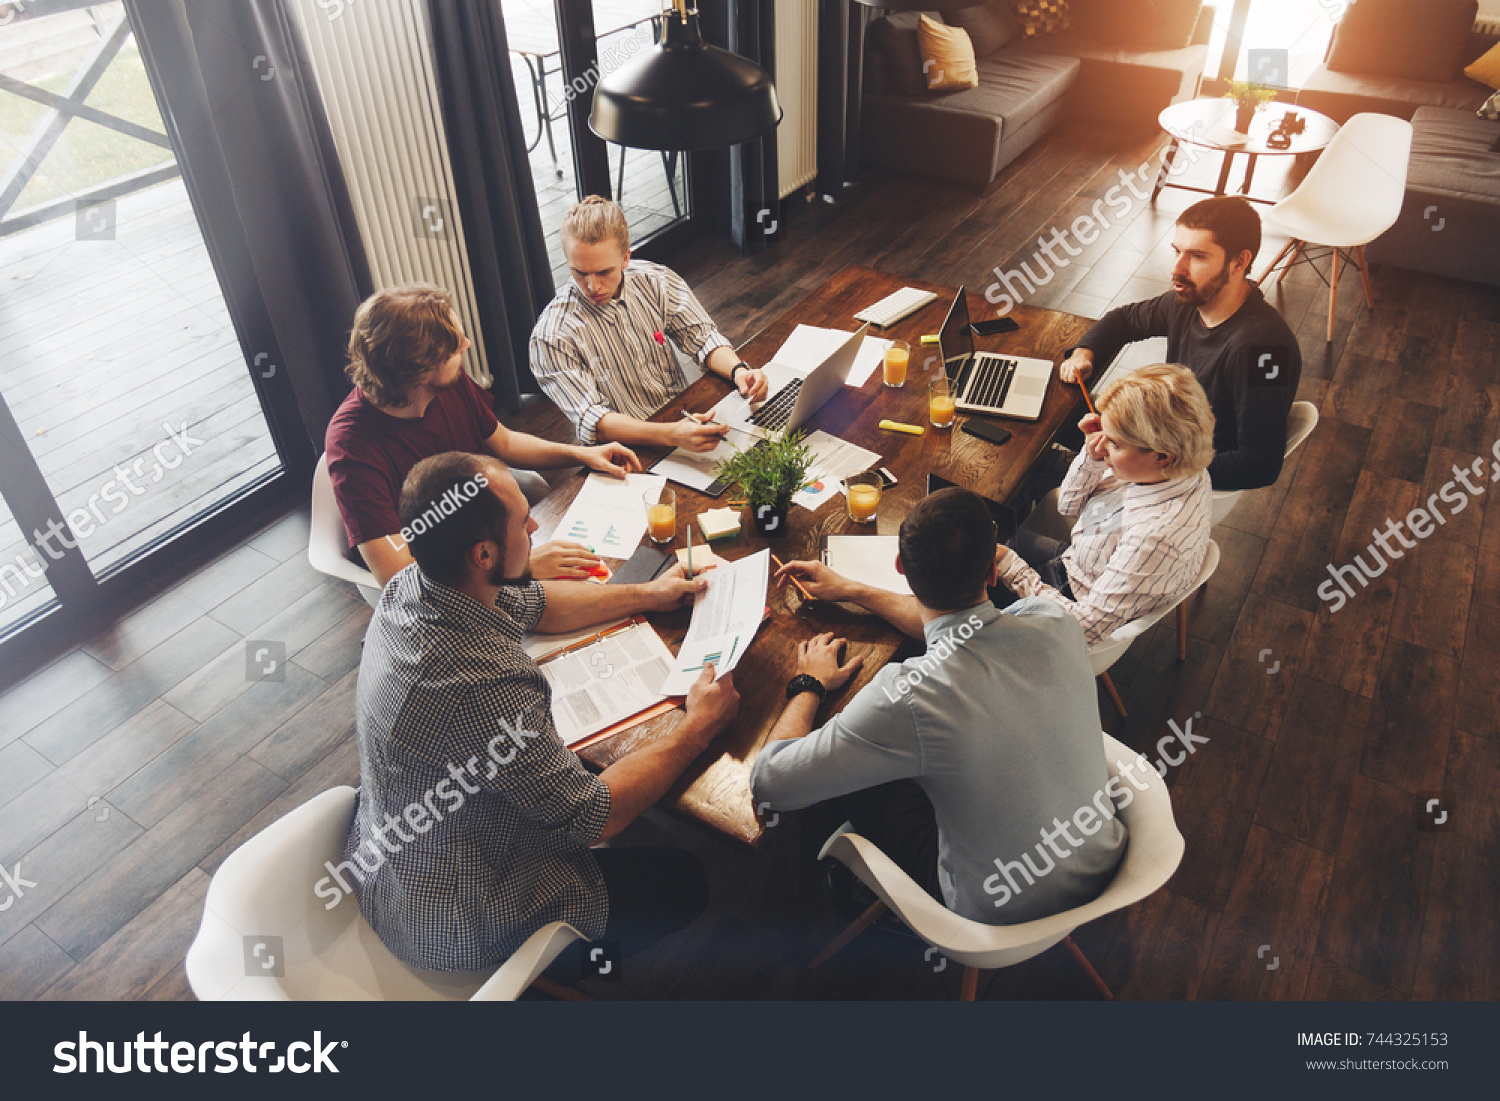 Teamwork on new business project in loft space. Group coworkers making great business decisions. Creative managers discussion work concept modern office #744325153